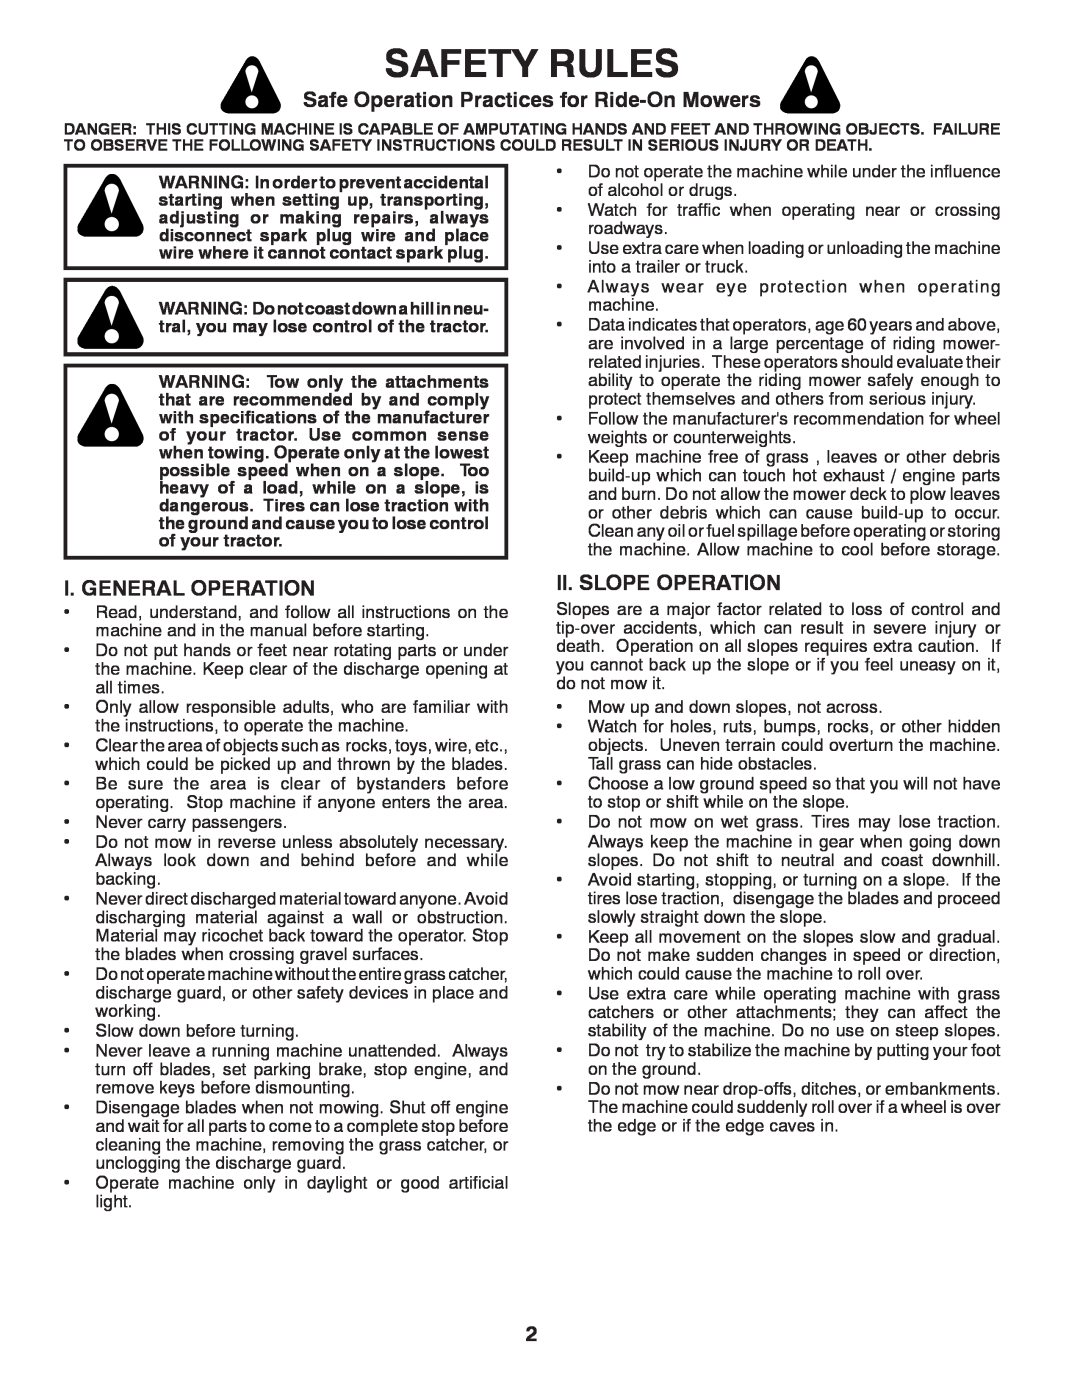 Jonsered LT2220 CMA2 Safety Rules, Safe Operation Practices for Ride-On Mowers, I. General Operation, Ii. Slope Operation 